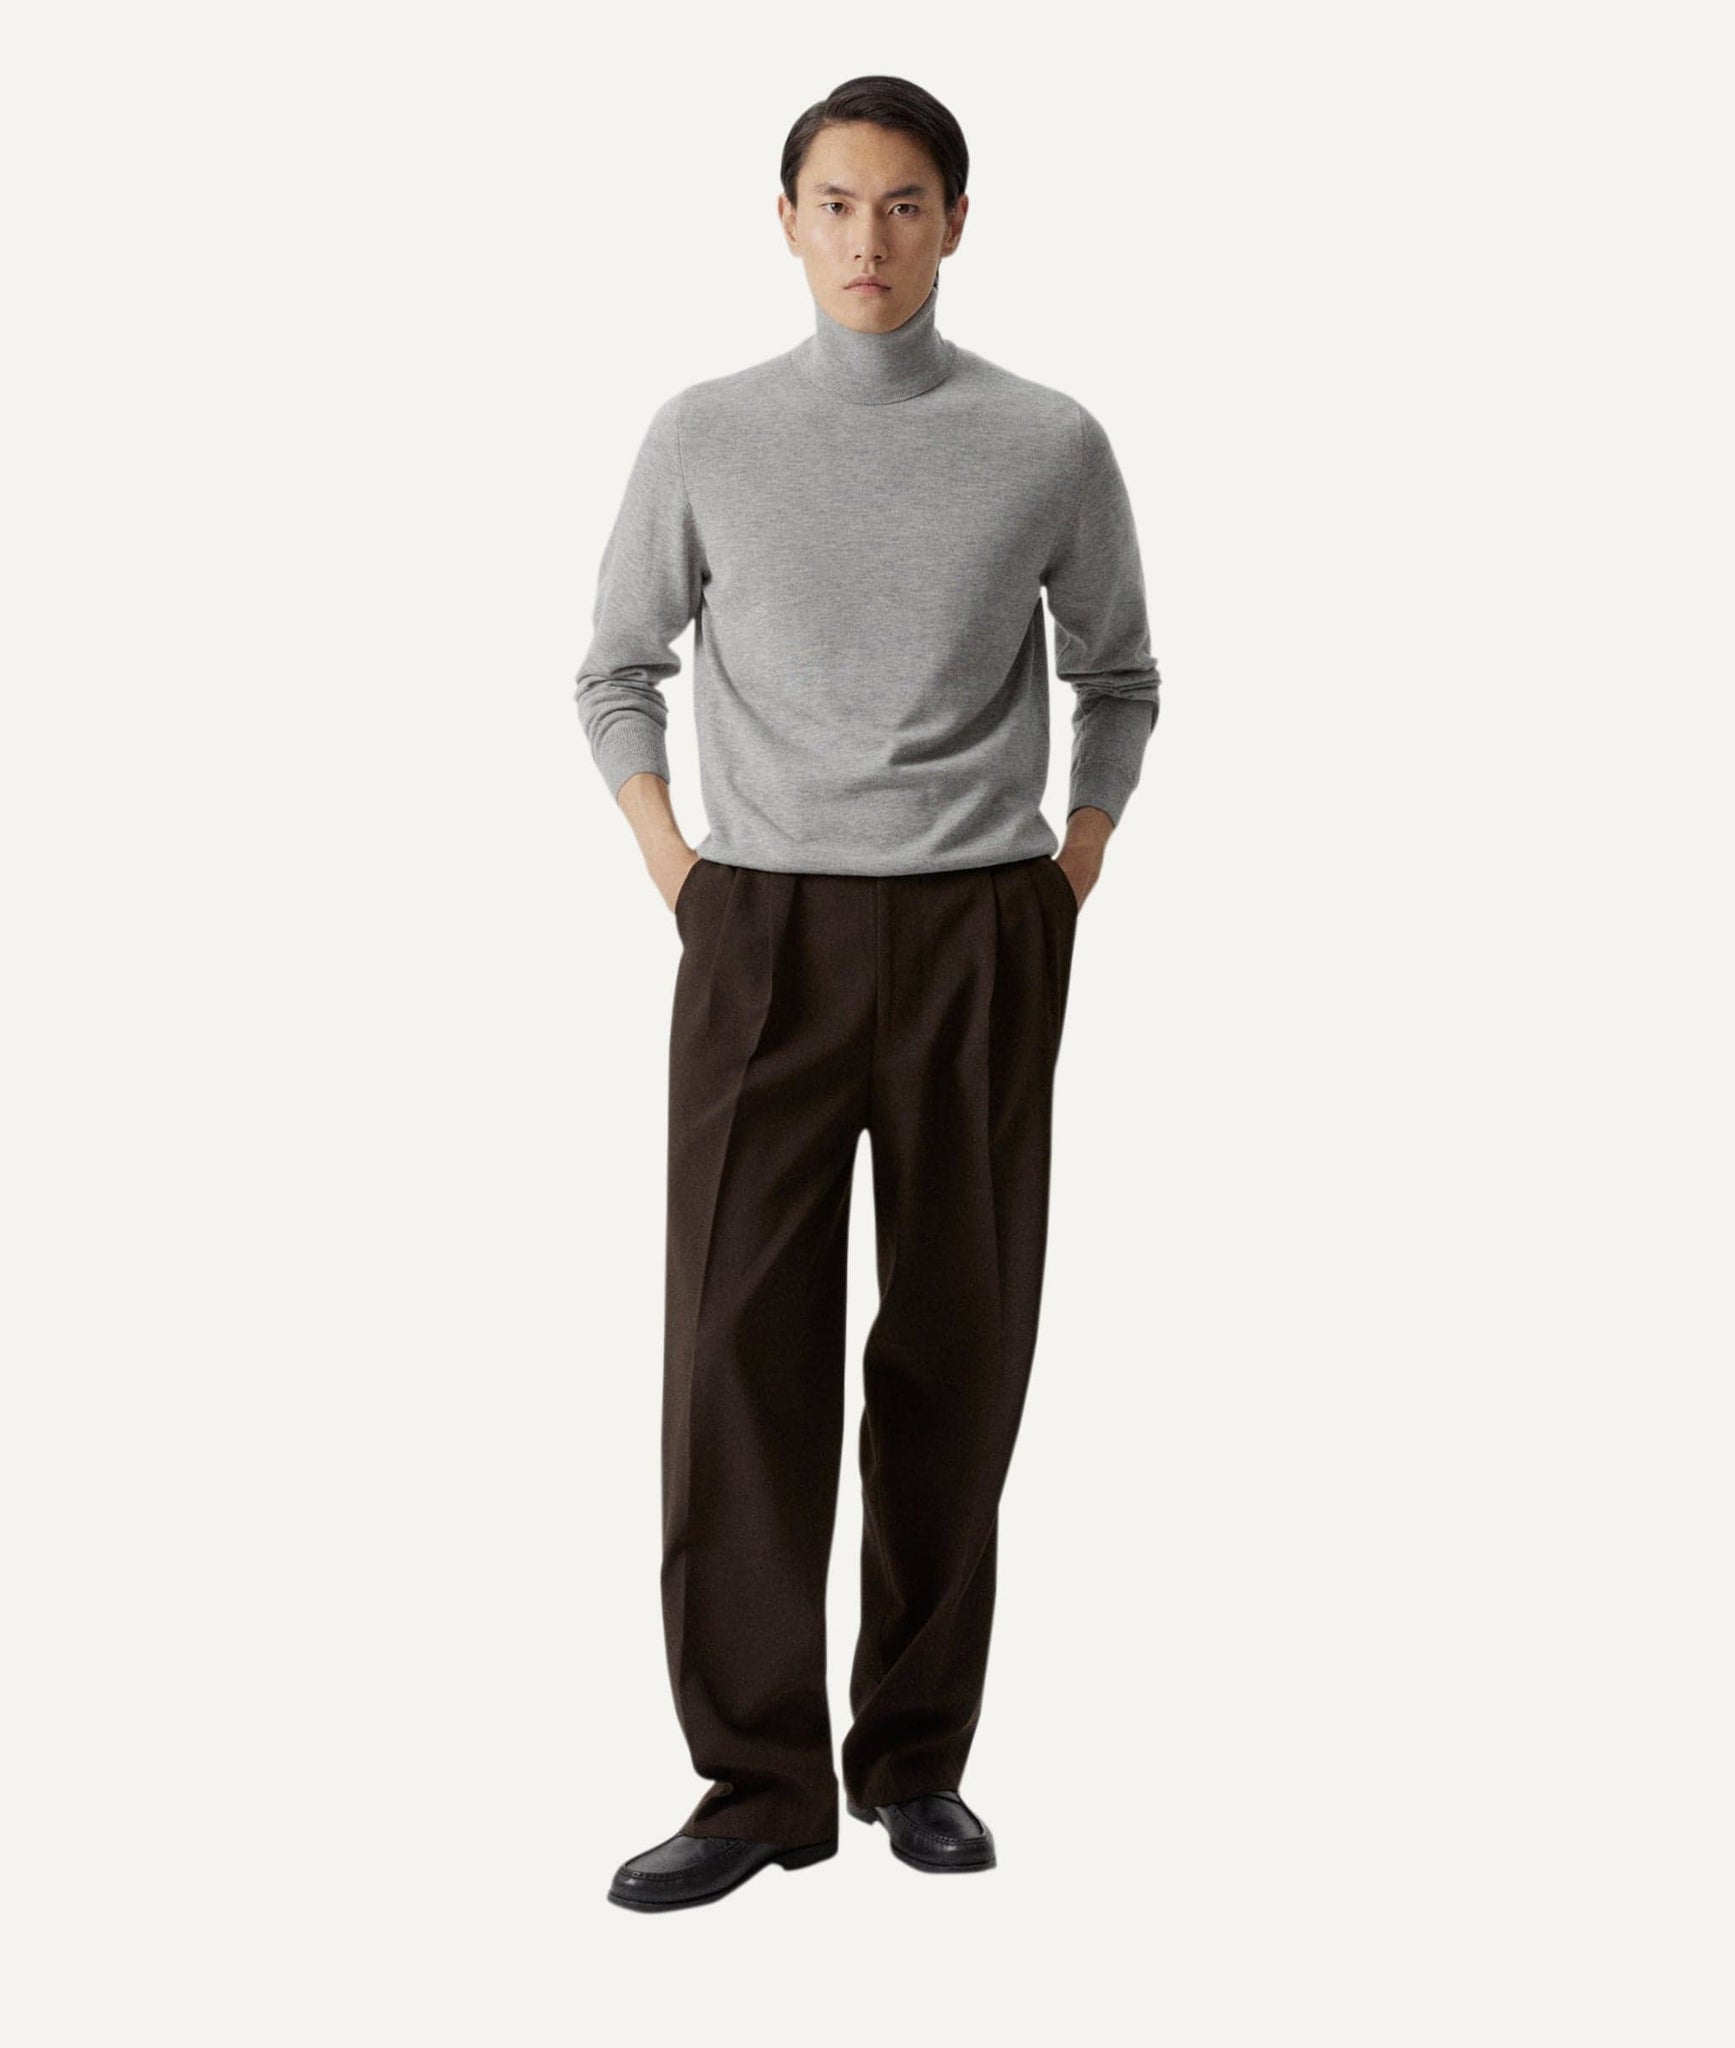 The Ultrasoft Roll-neck Sweater